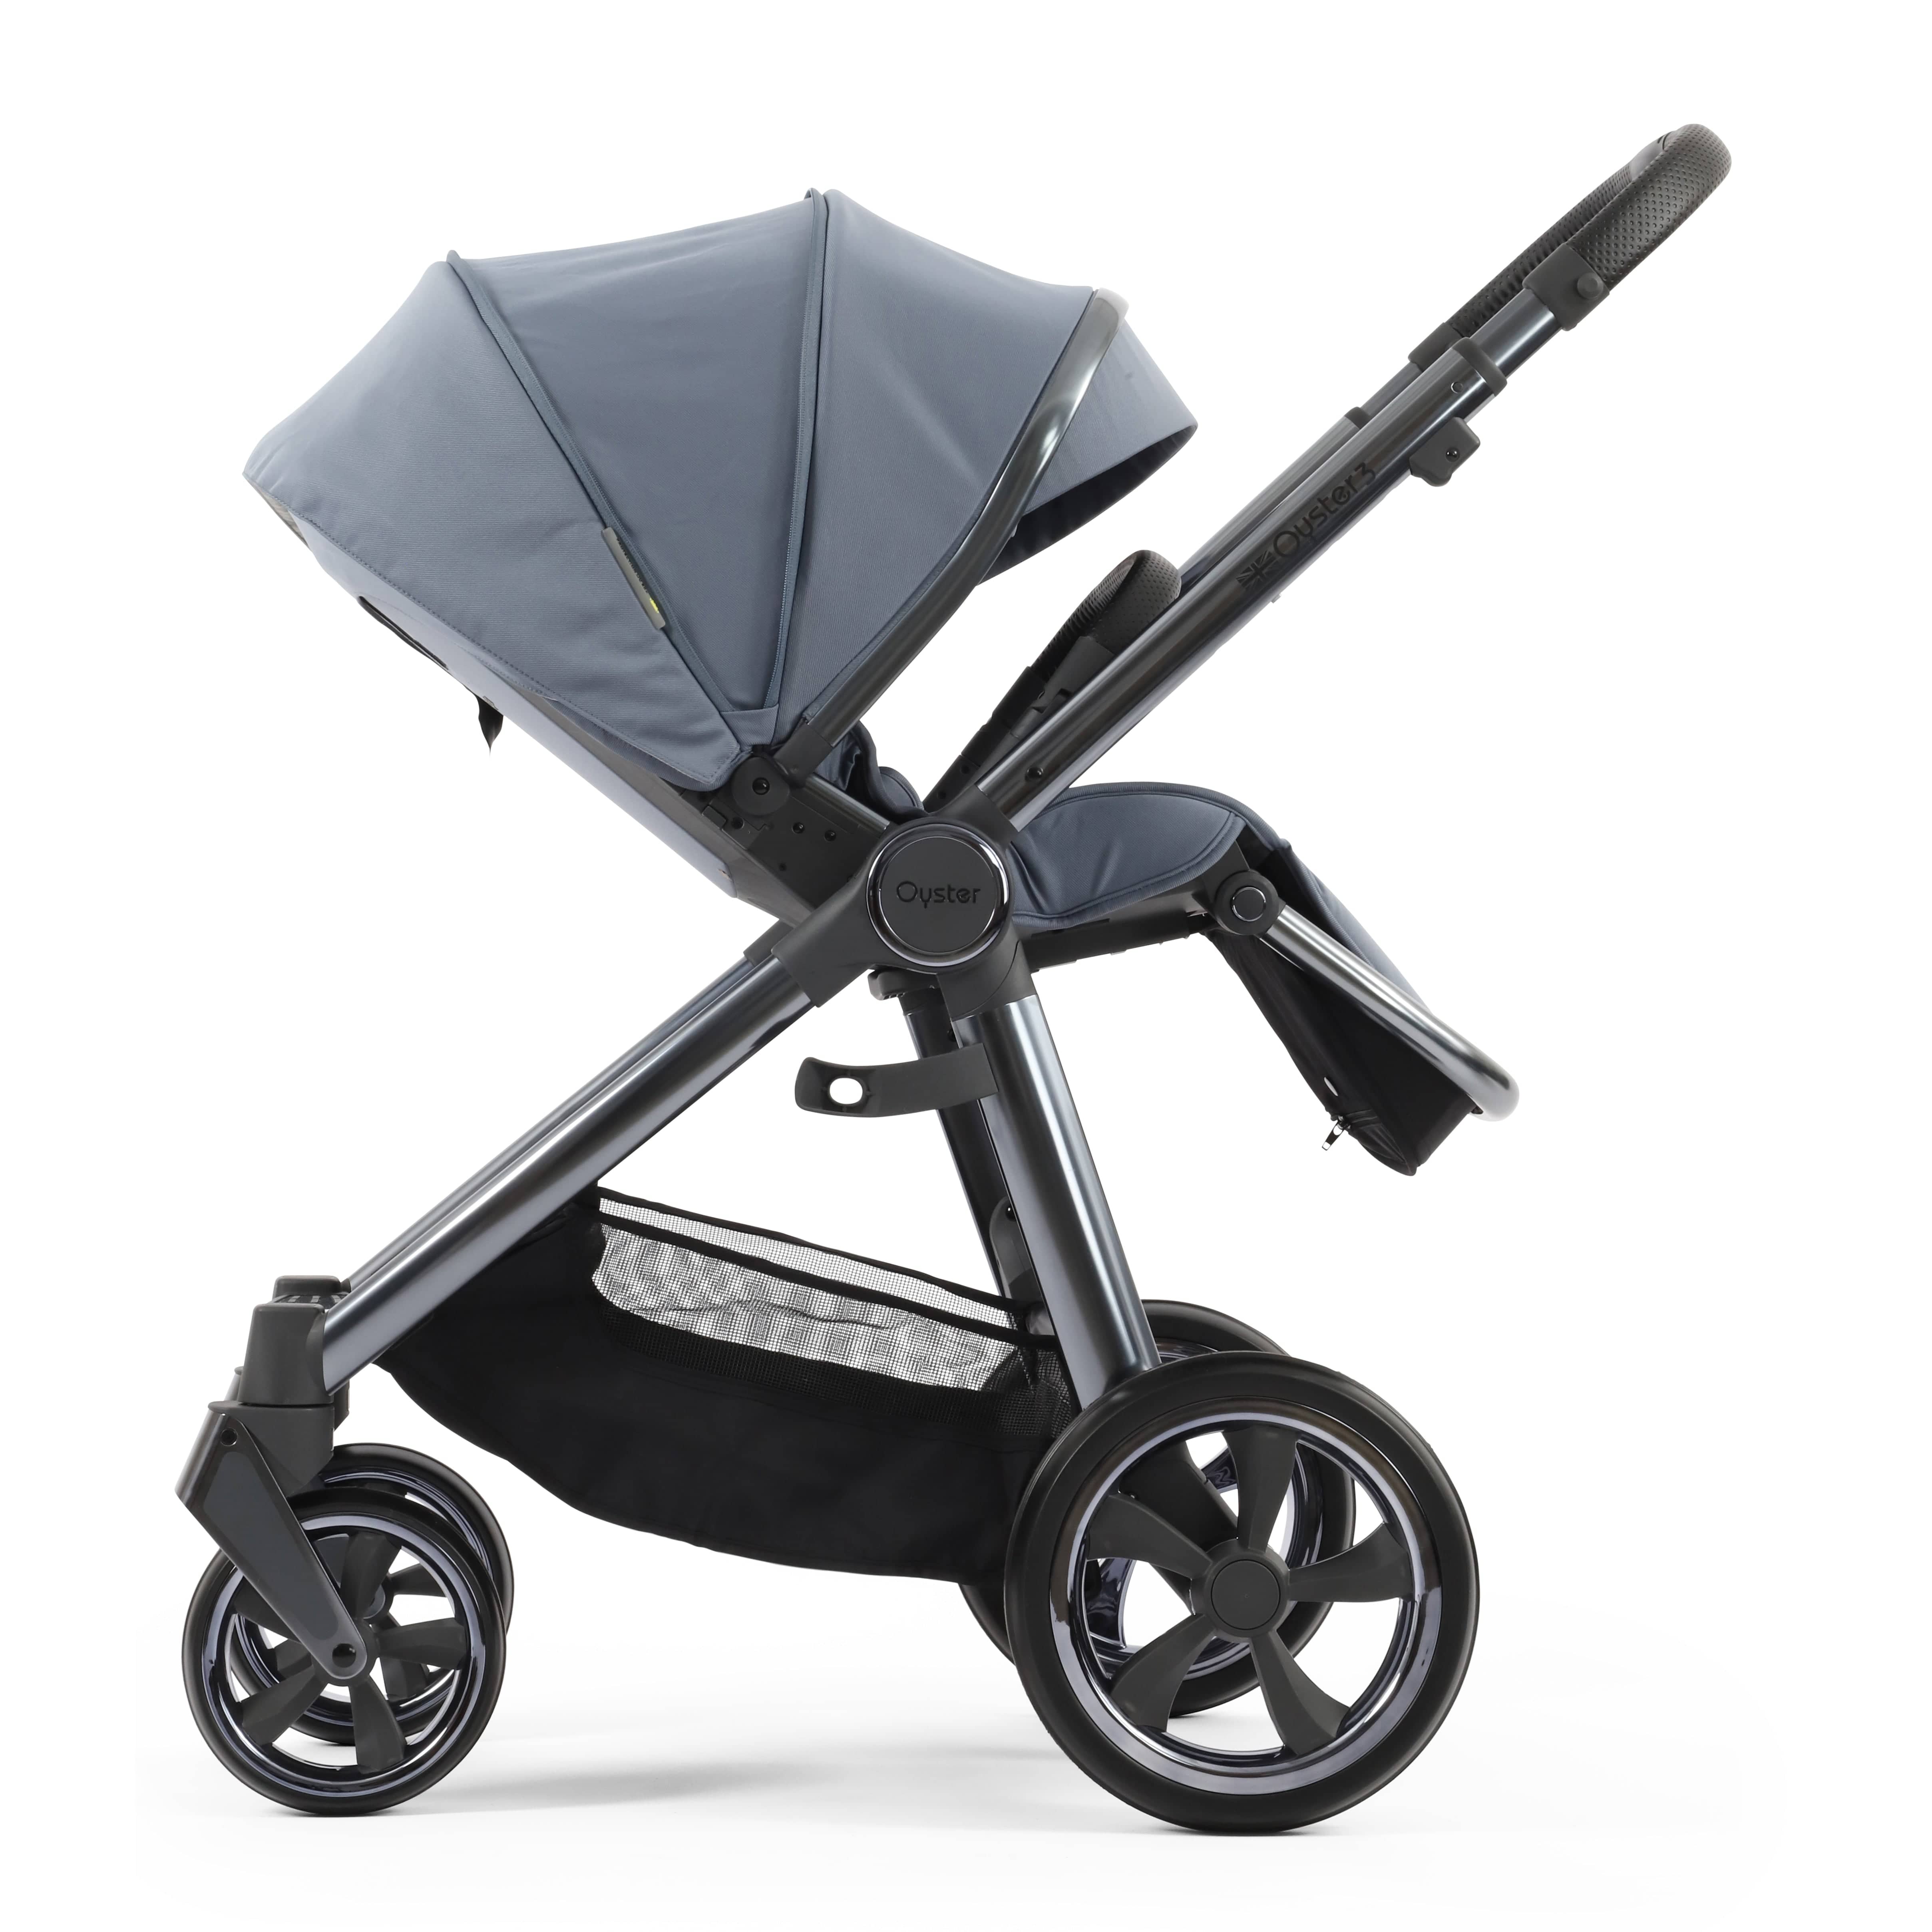 BabyStyle baby prams BabyStyle Oyster3 Pram & Carrycot Dream Blue 14731-DMB